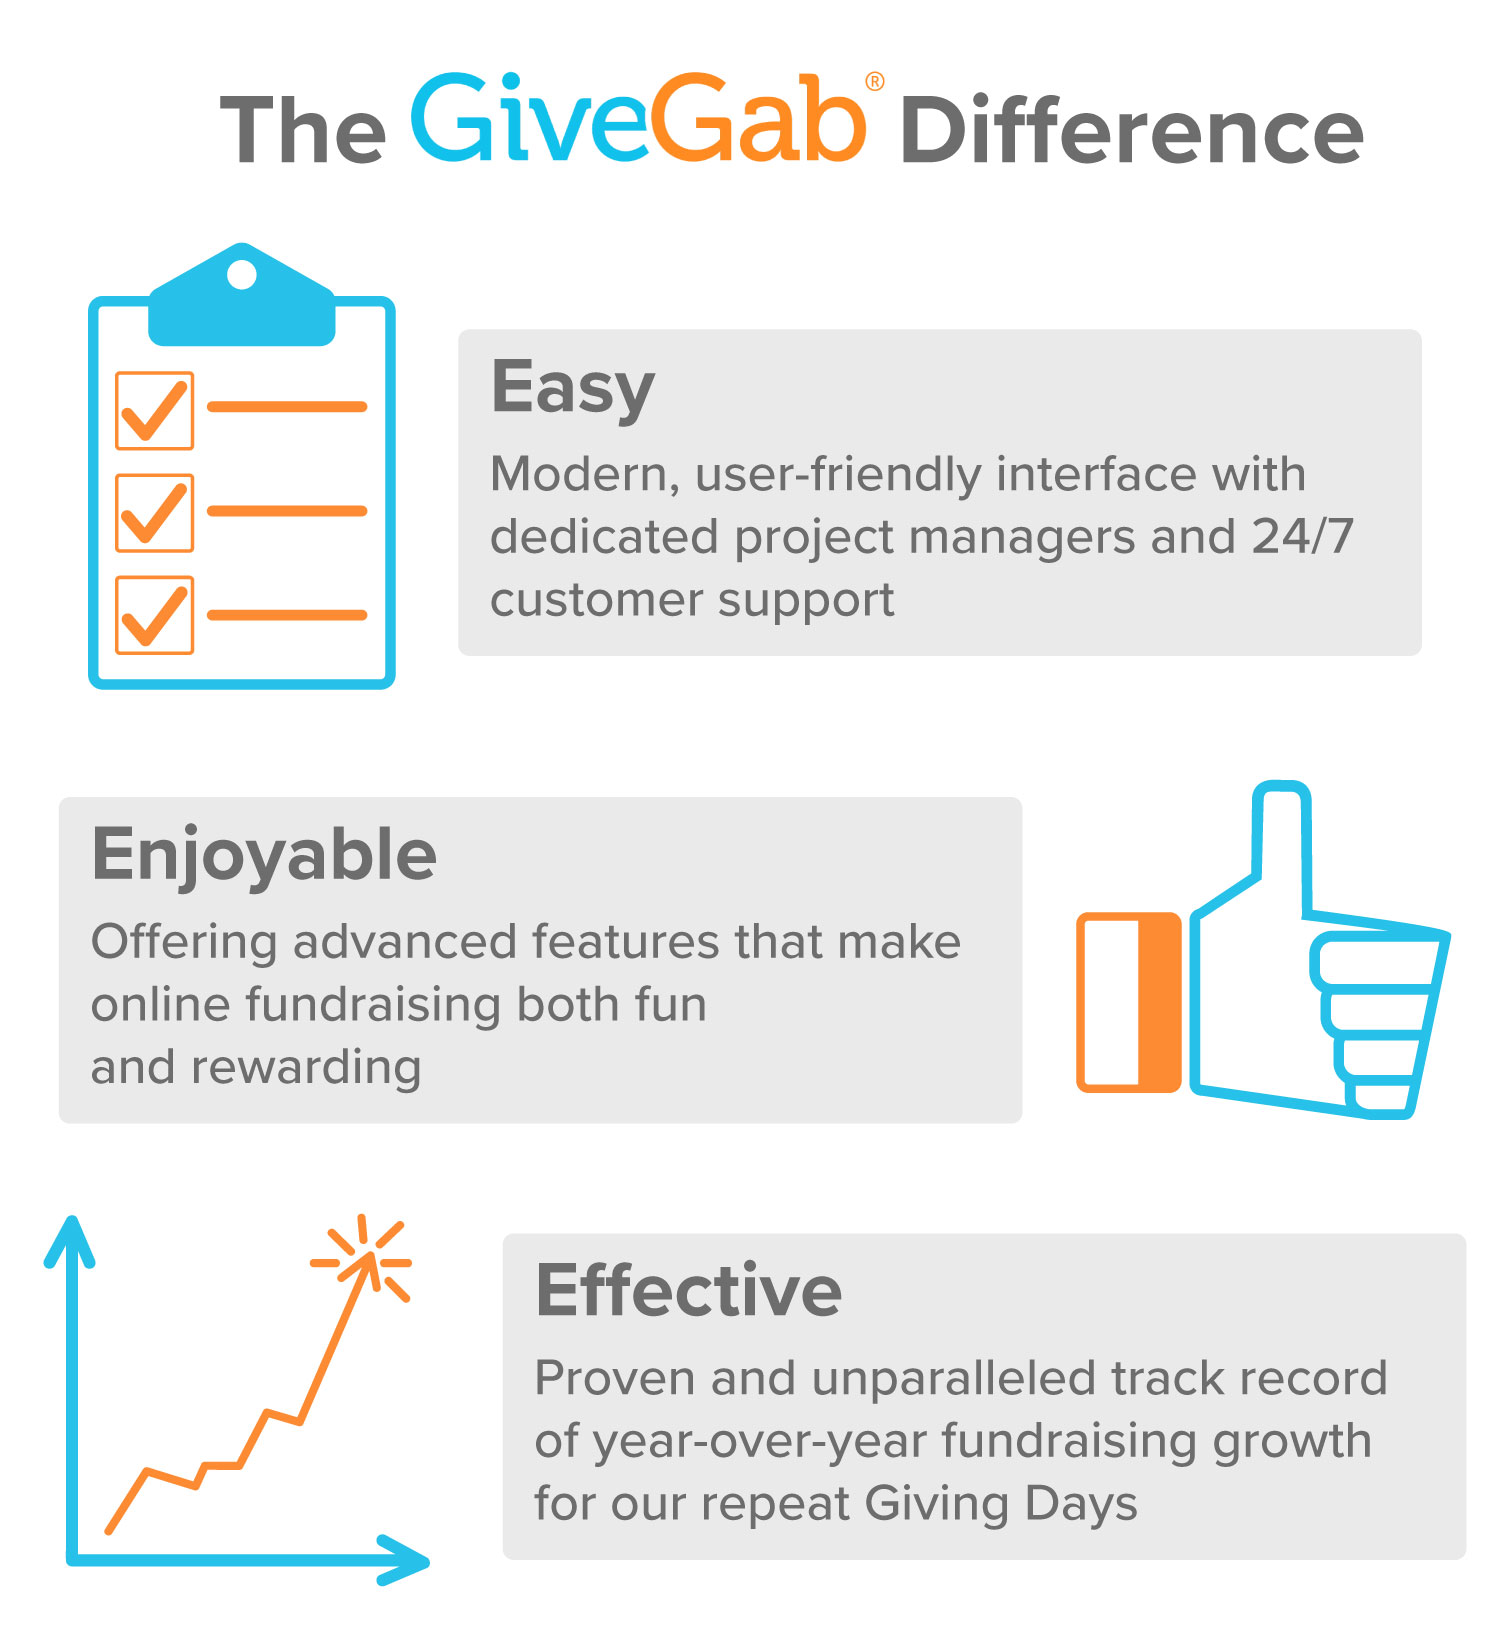 Our mission is to make it incredibly easy for you to be great at your job! We do this by giving you an easy, enjoyable, and effective digital fundraising experience you won't find anywhere else.